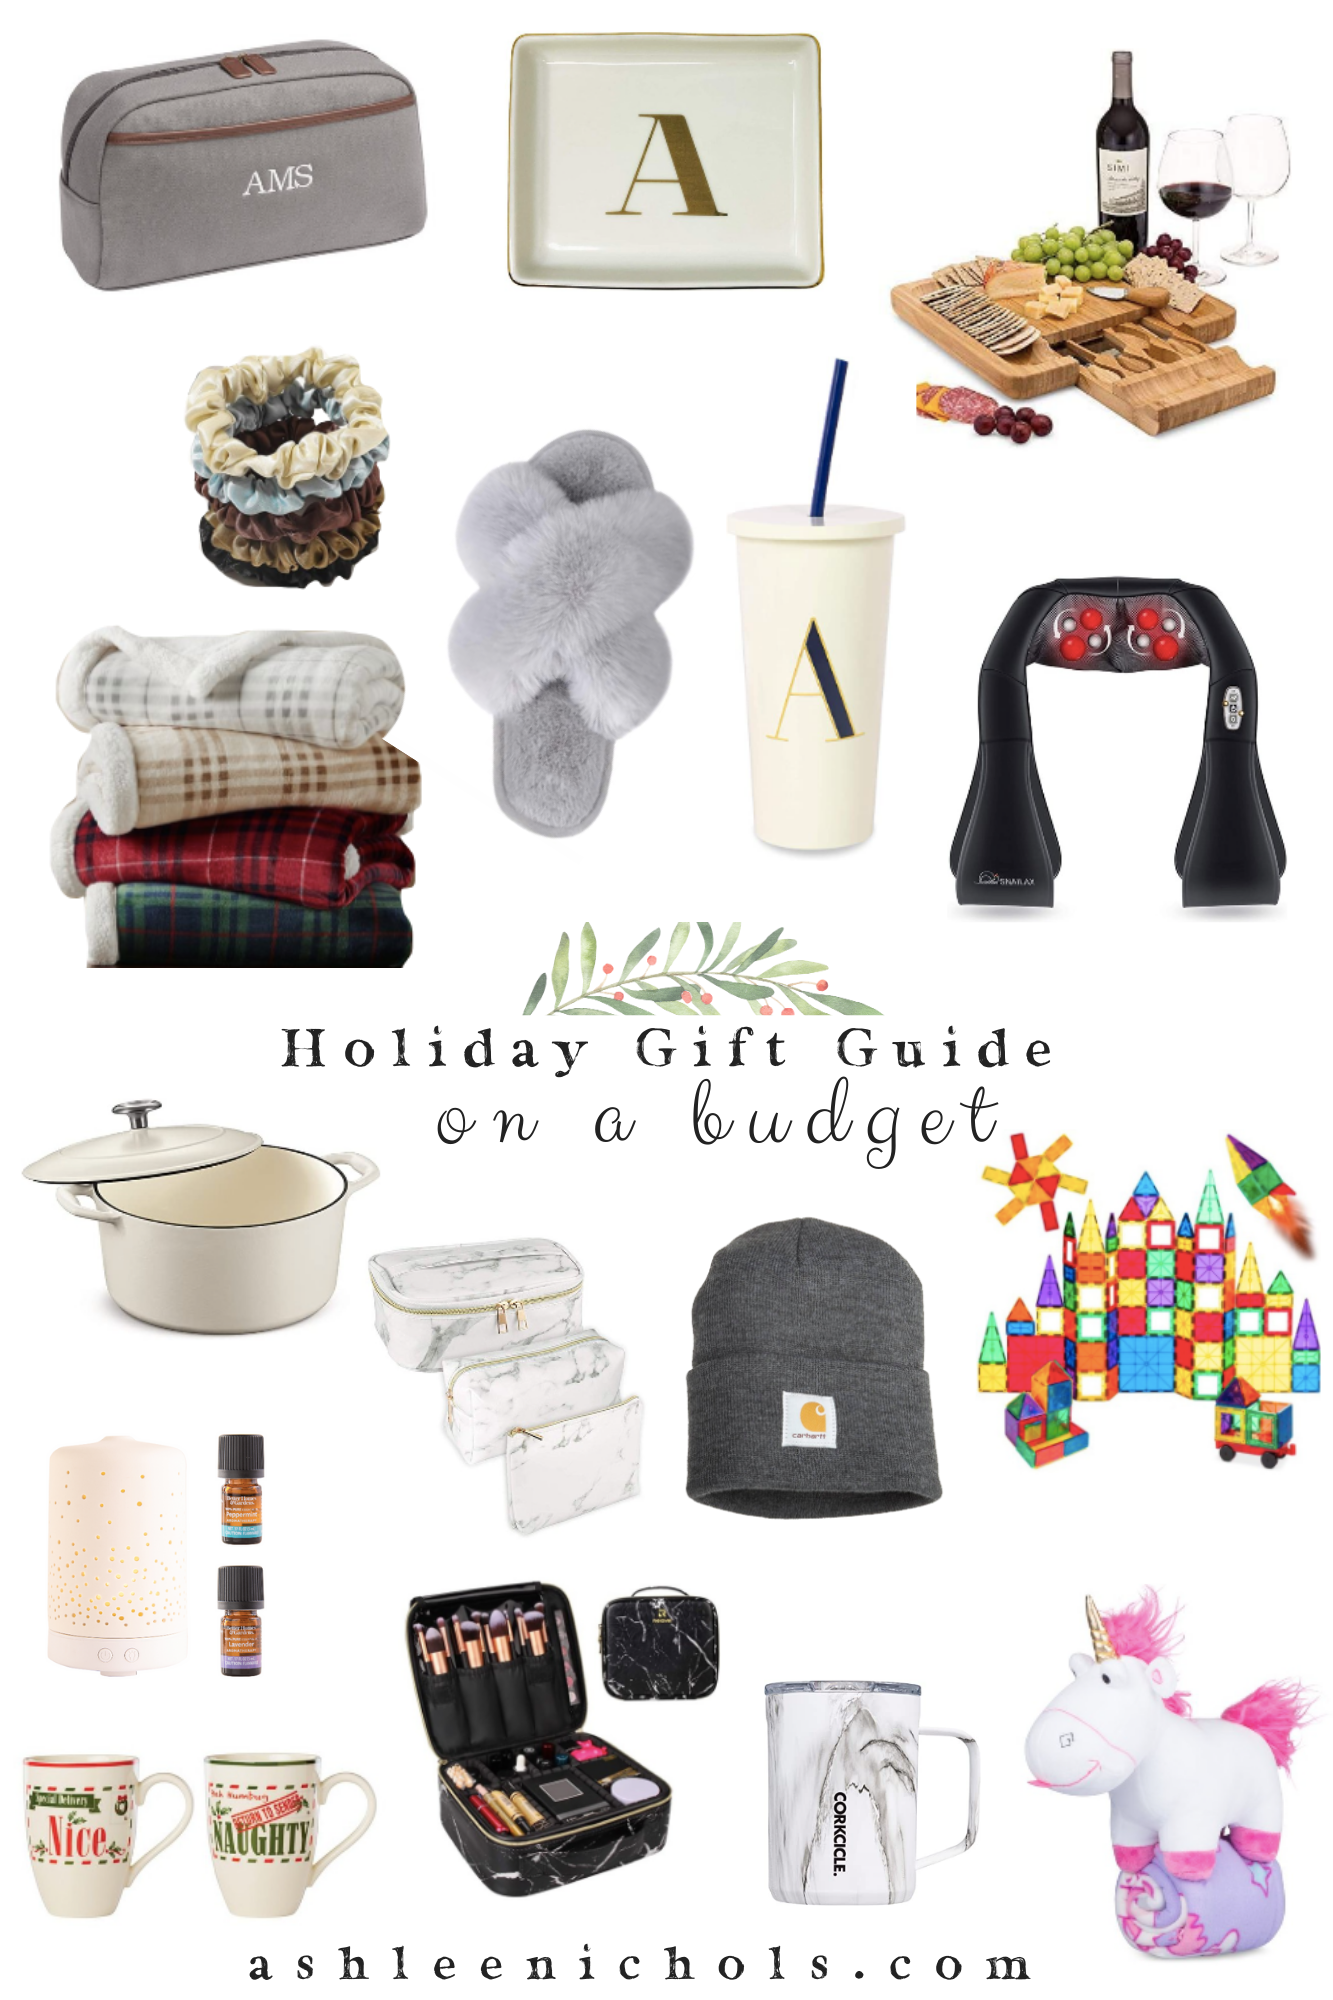 Six Unexpected and Budget-Friendly Holiday Gifts